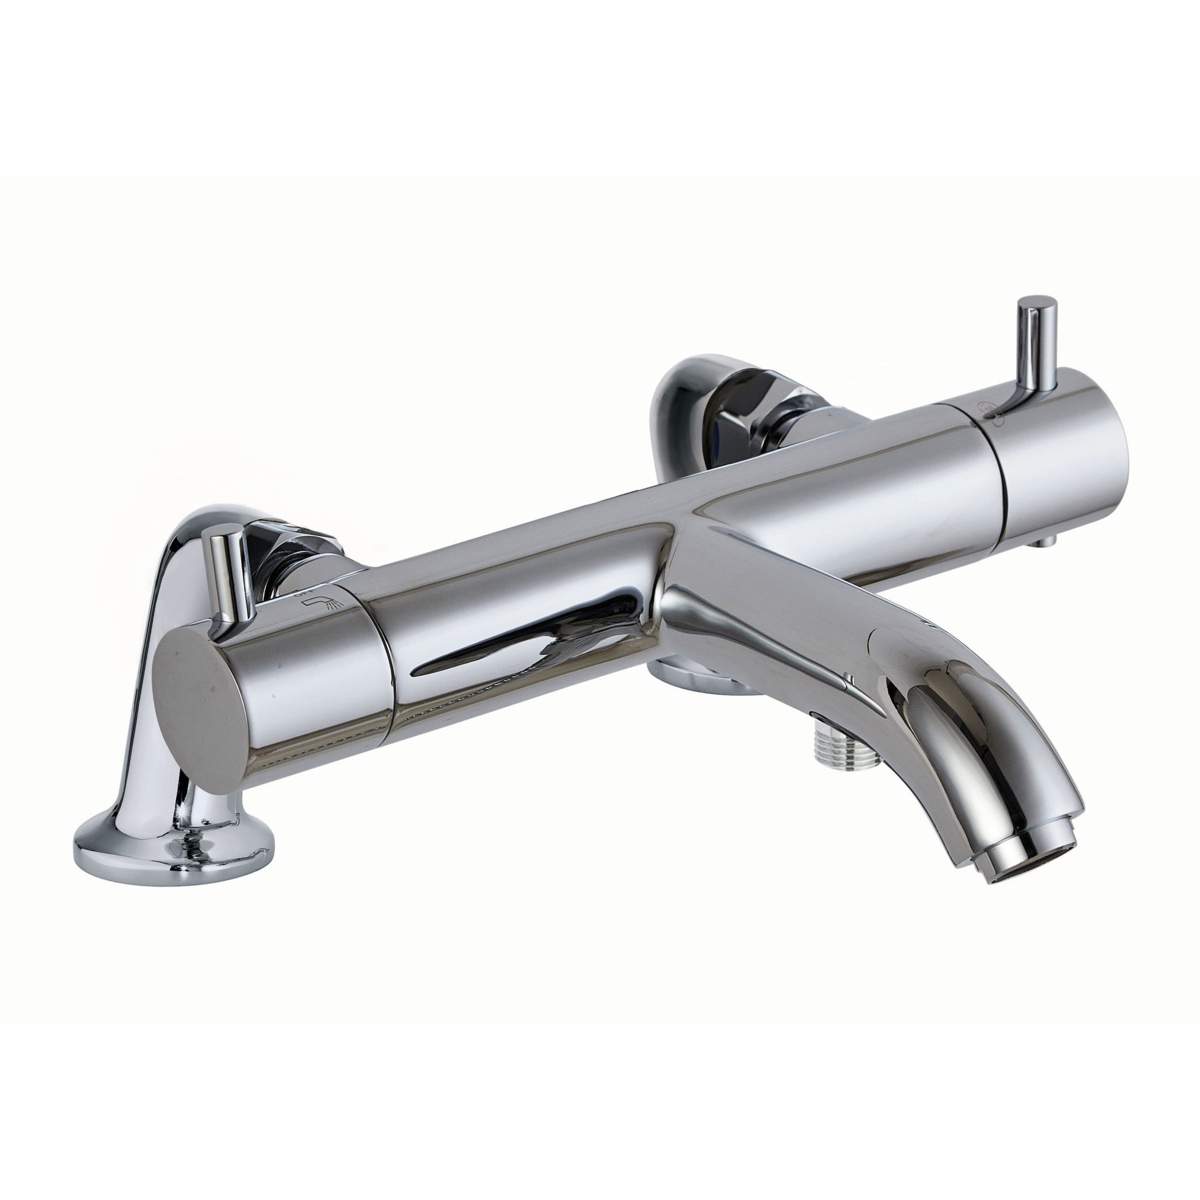 JTP Florence Thermostatic Deck Mounted Bath and Shower Mixer (15659)